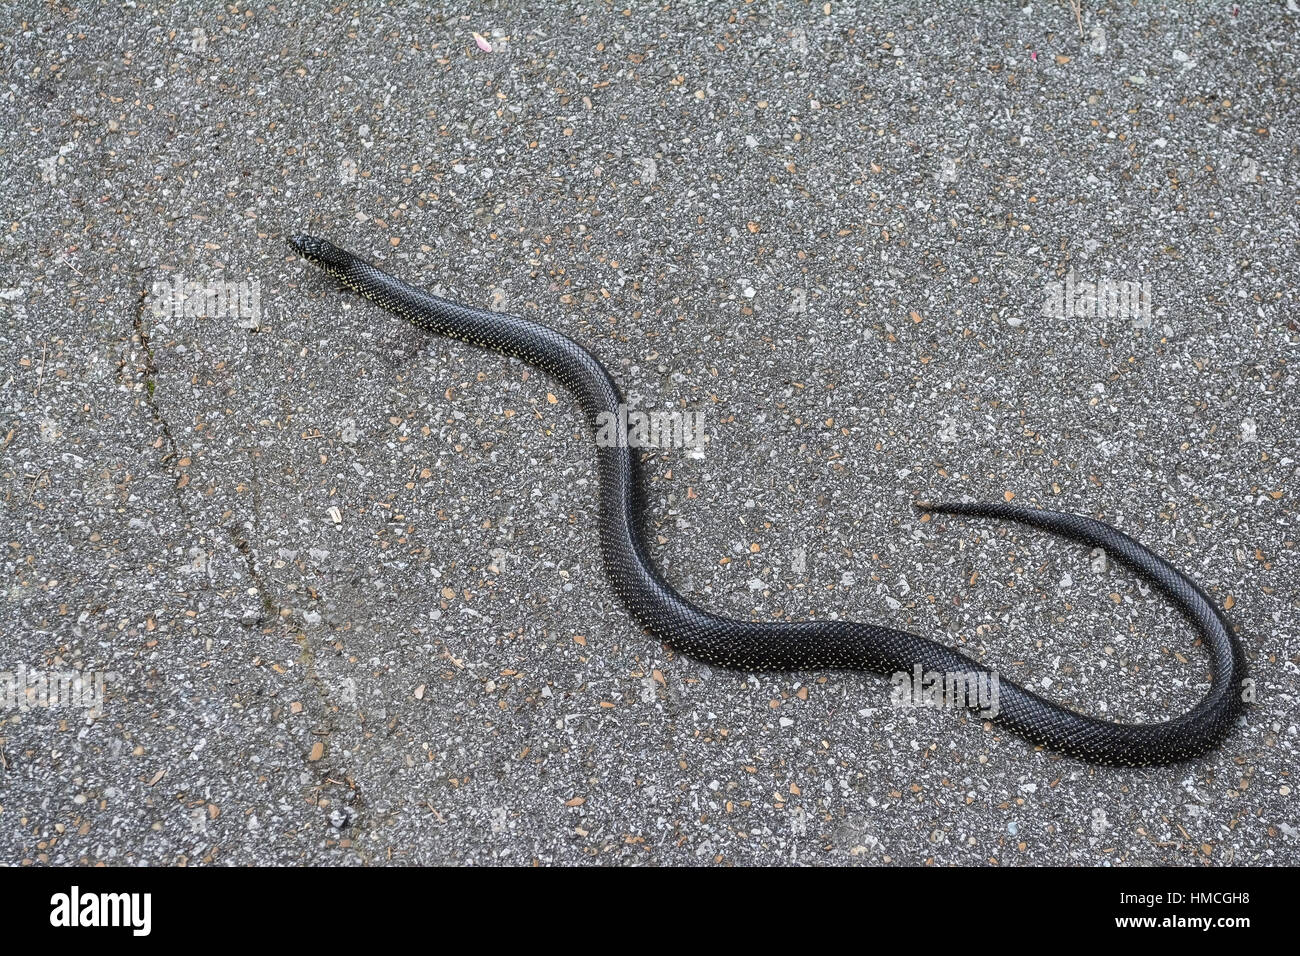 A black king snake isolated on a paved asphalt background. Stock Photo